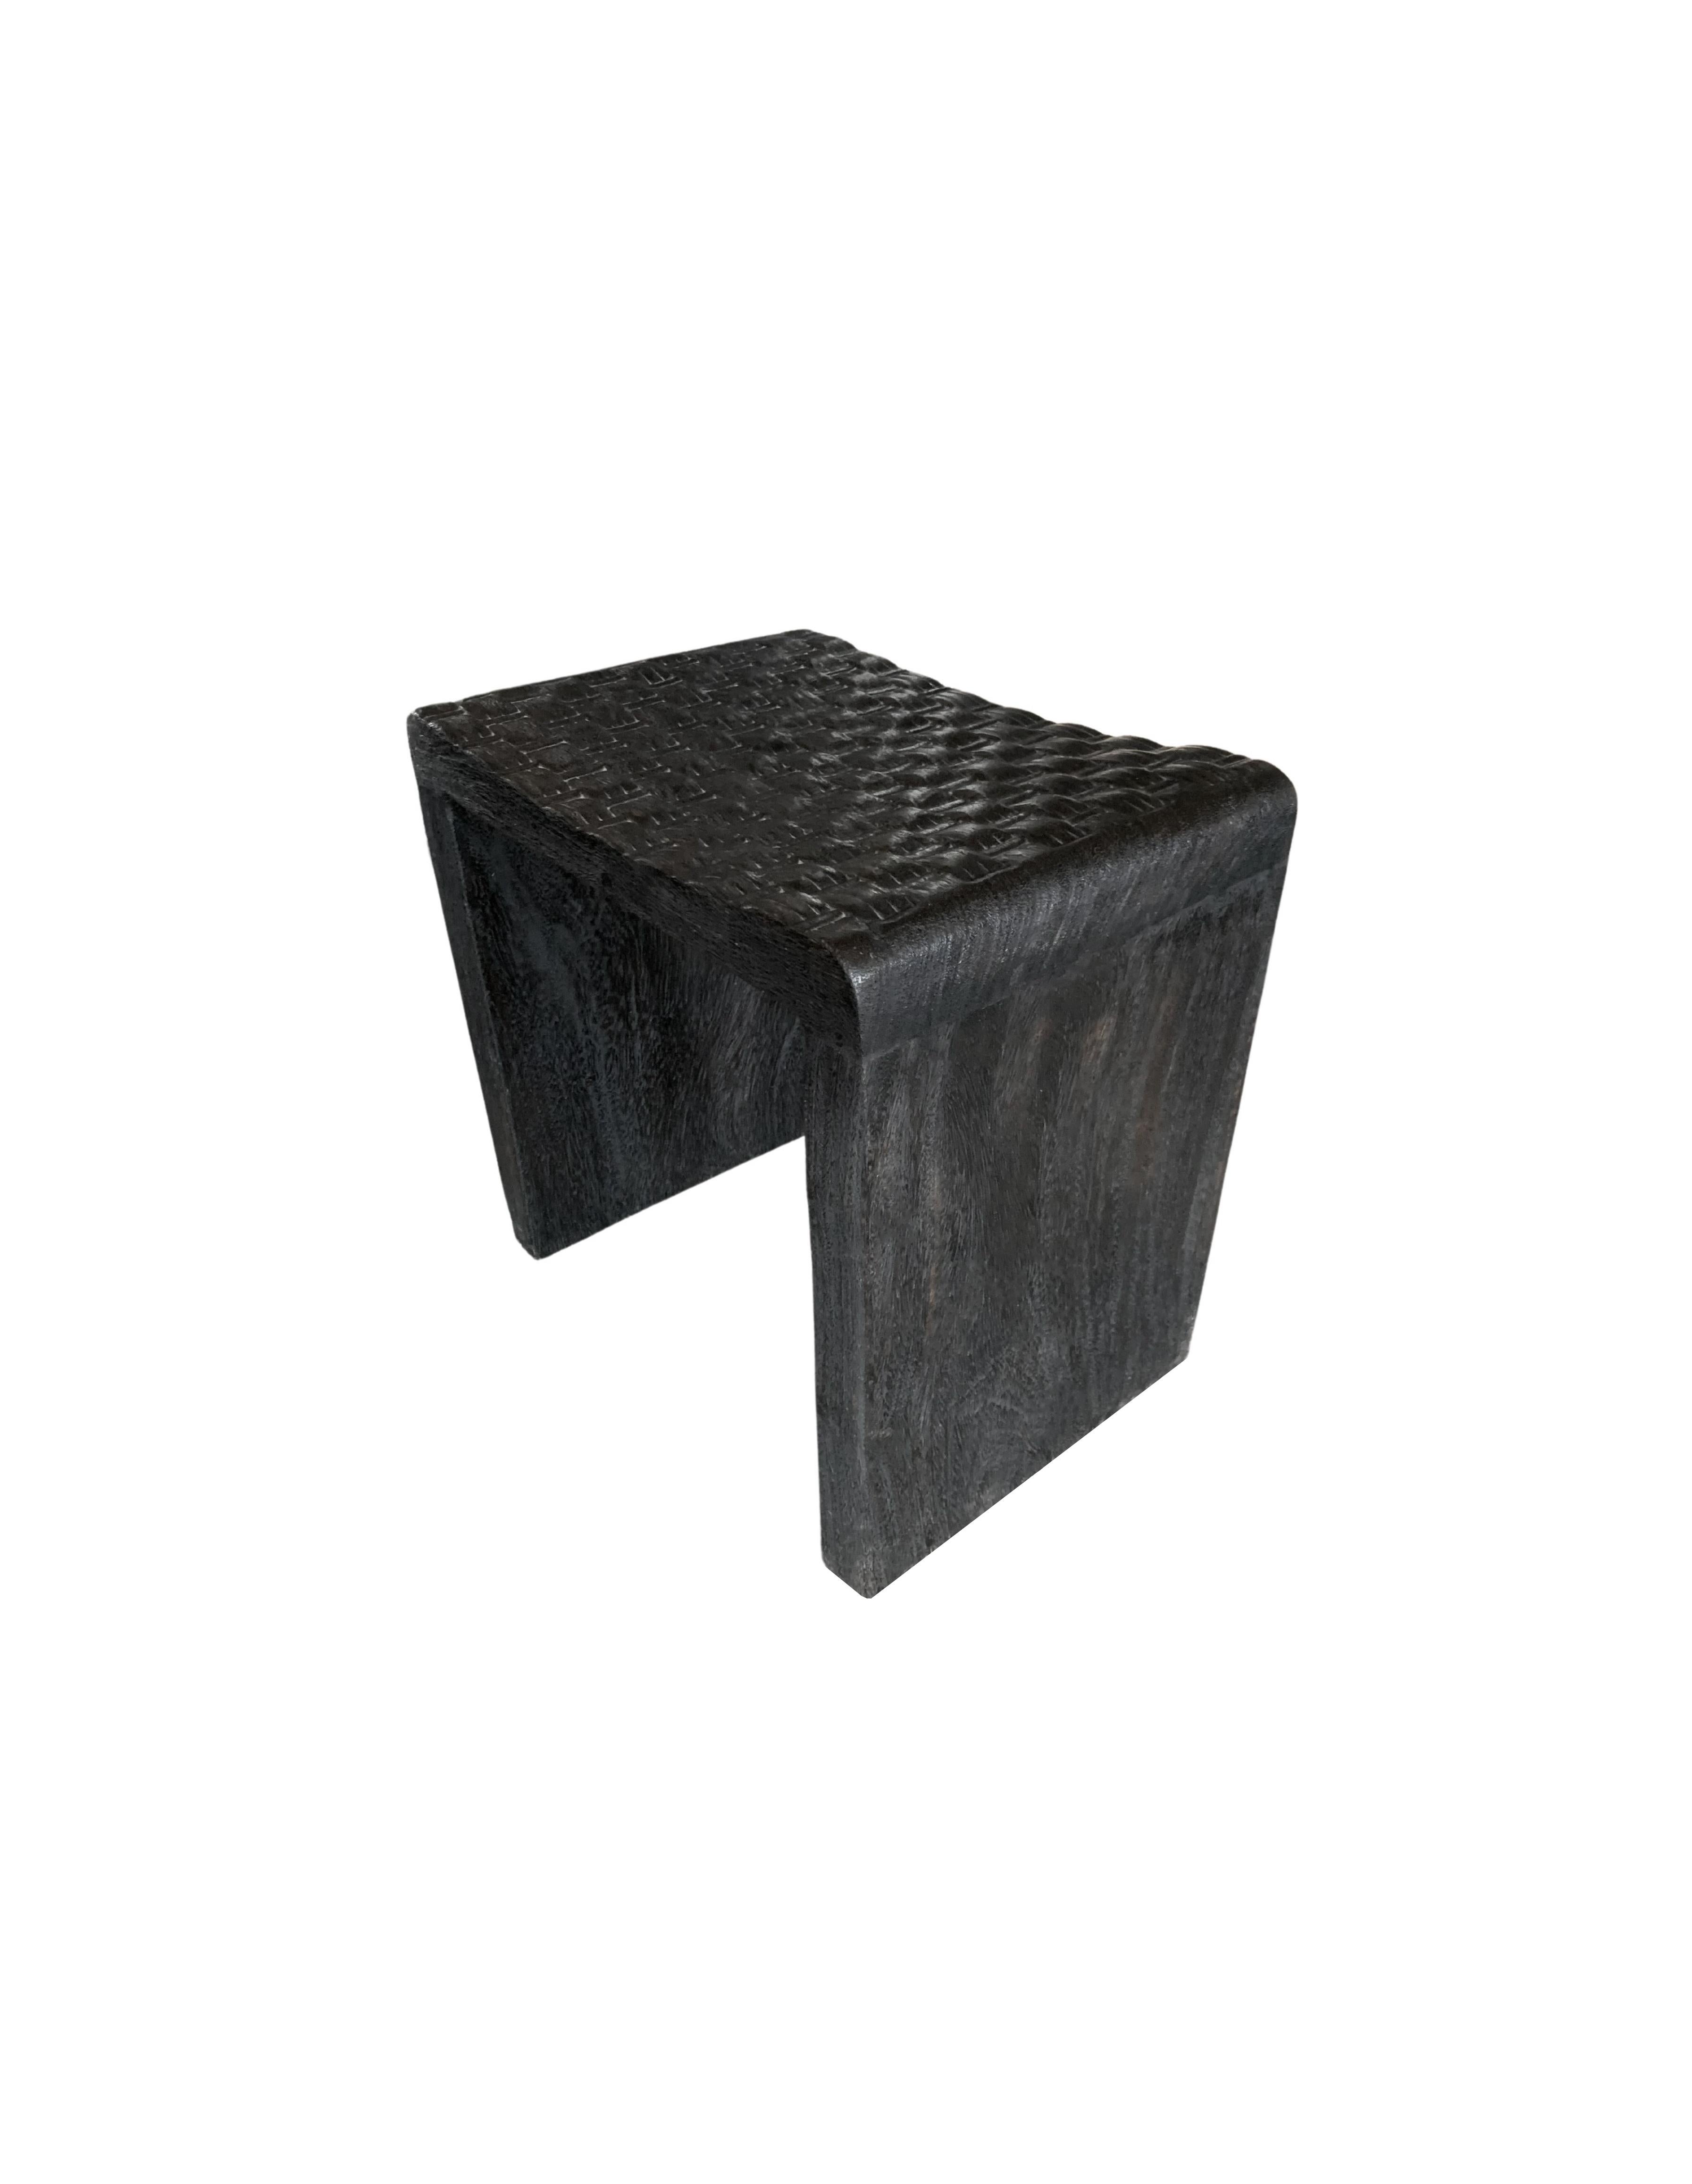 Organic Modern Sculptural Mango Wood Stool with Carved Detailing & Burnt Finish Modern Organic For Sale